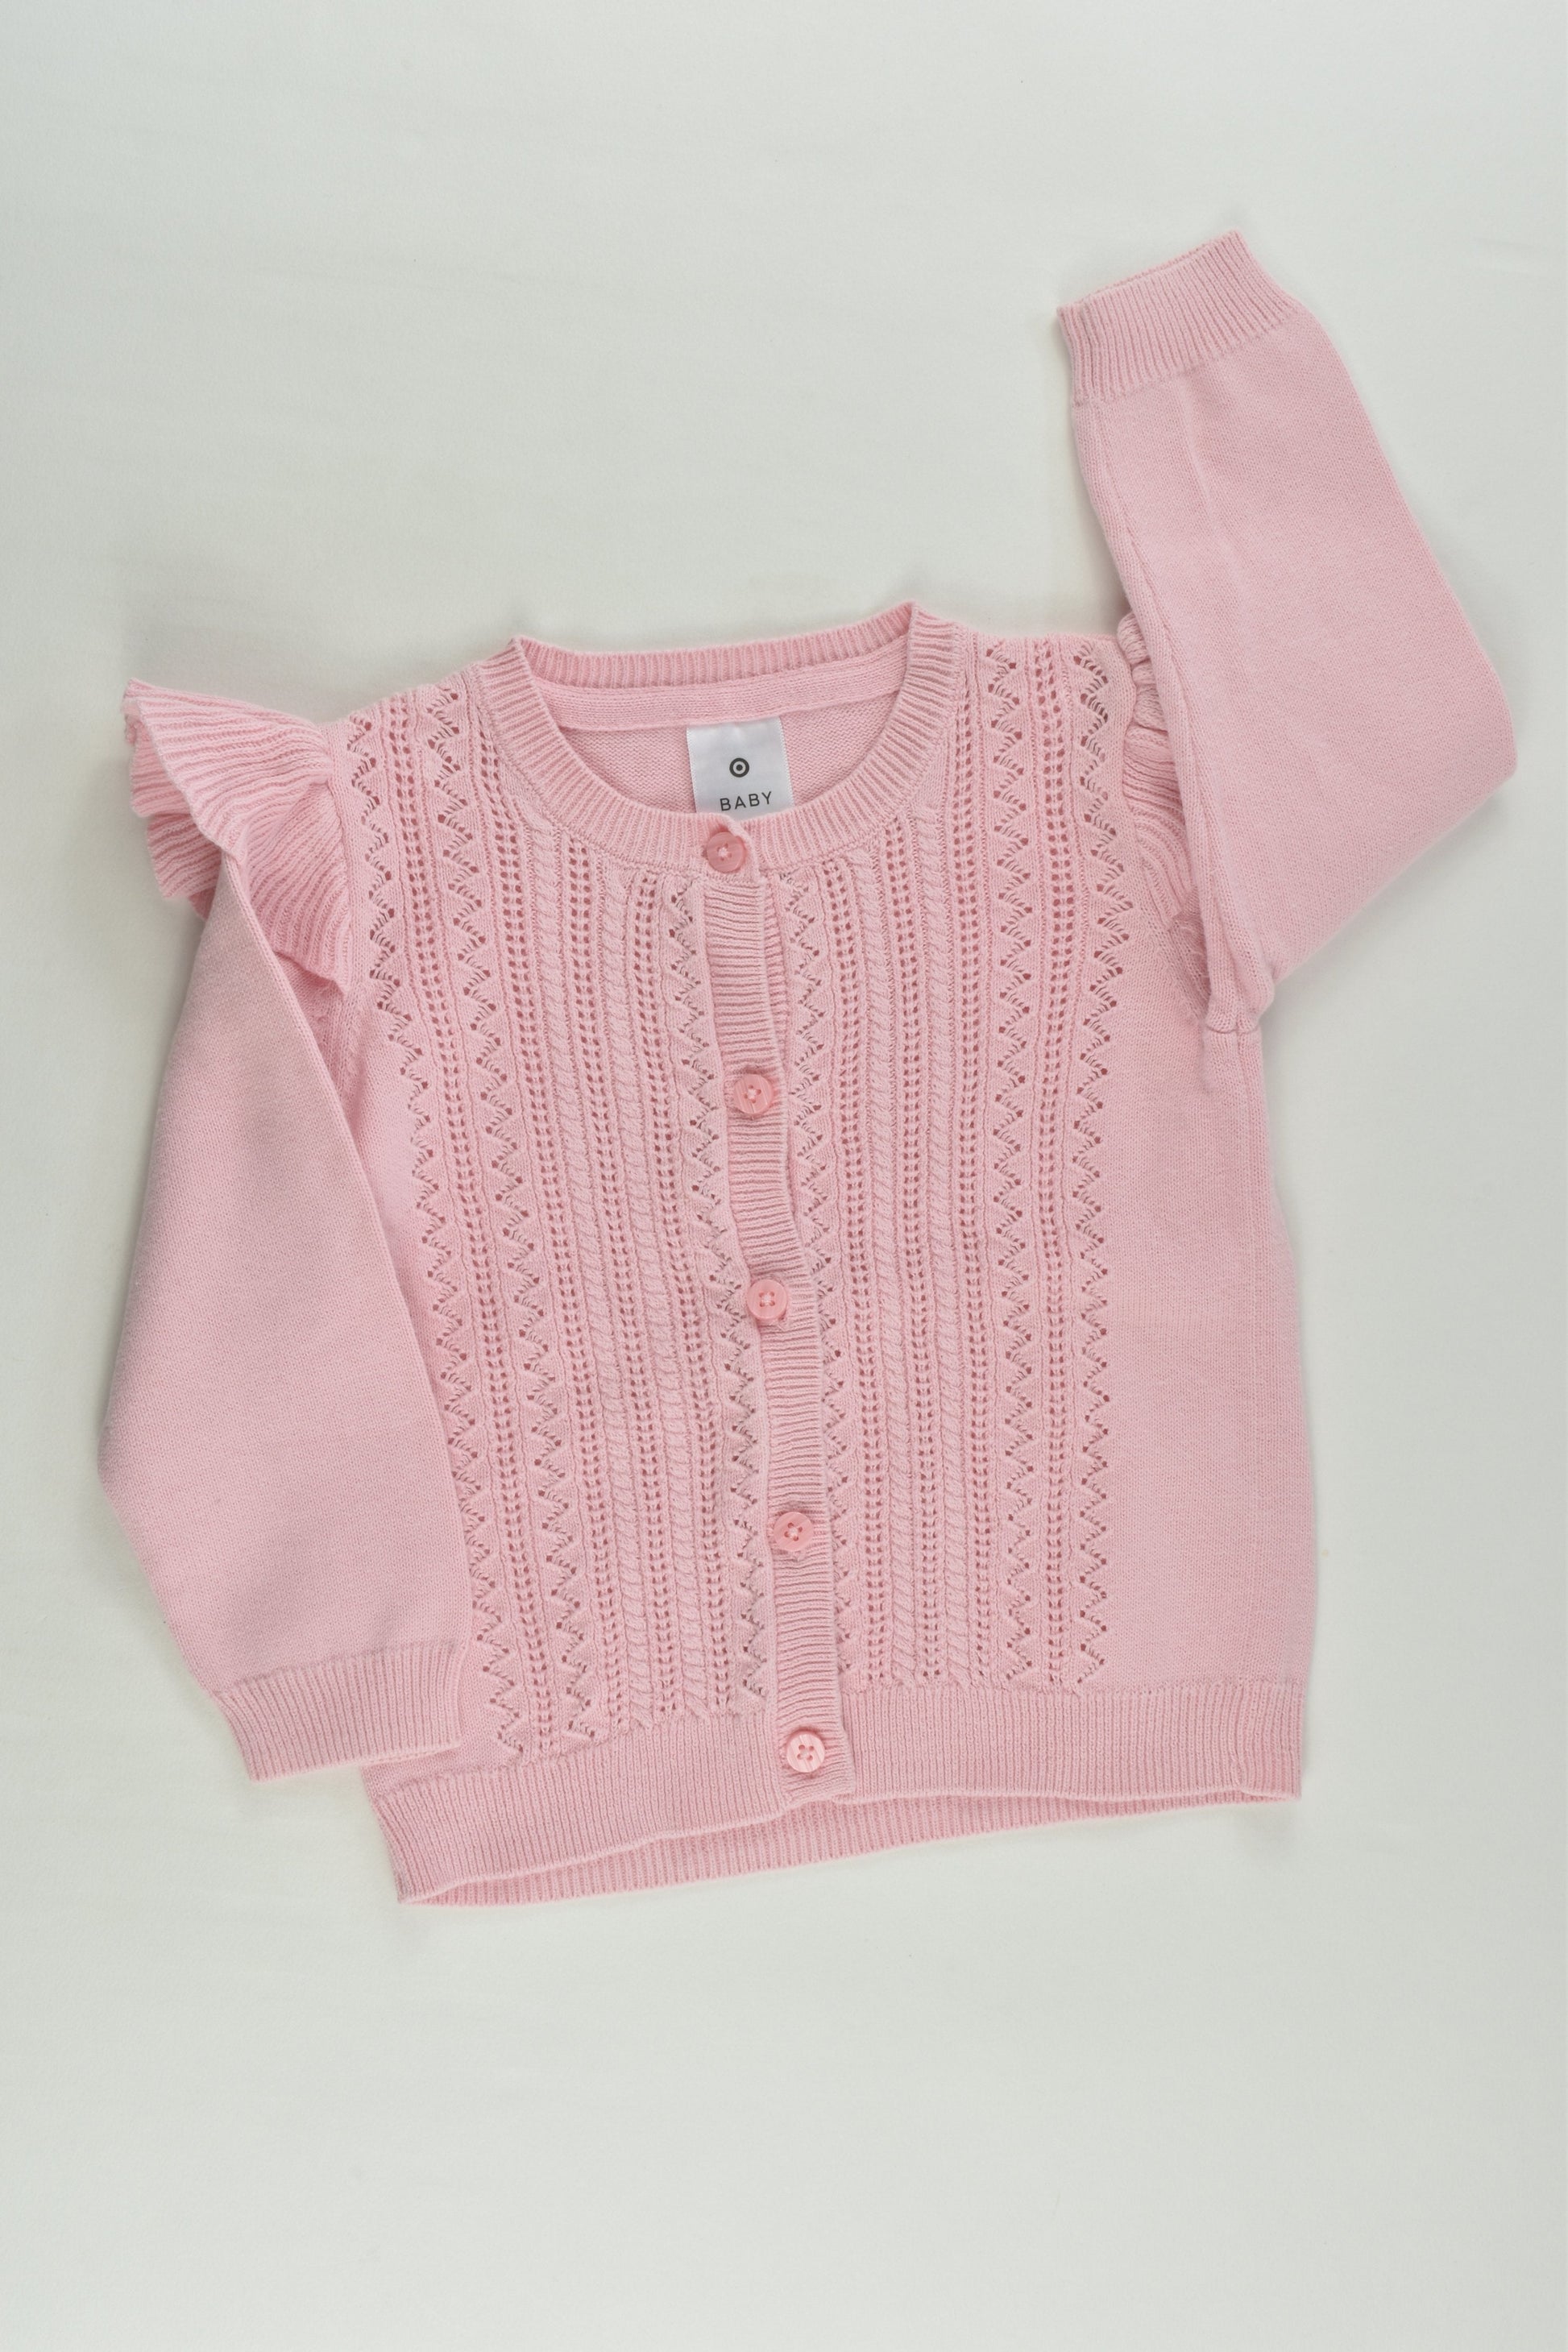 Target Size 0 (6-12 months) Knitted Cardigan